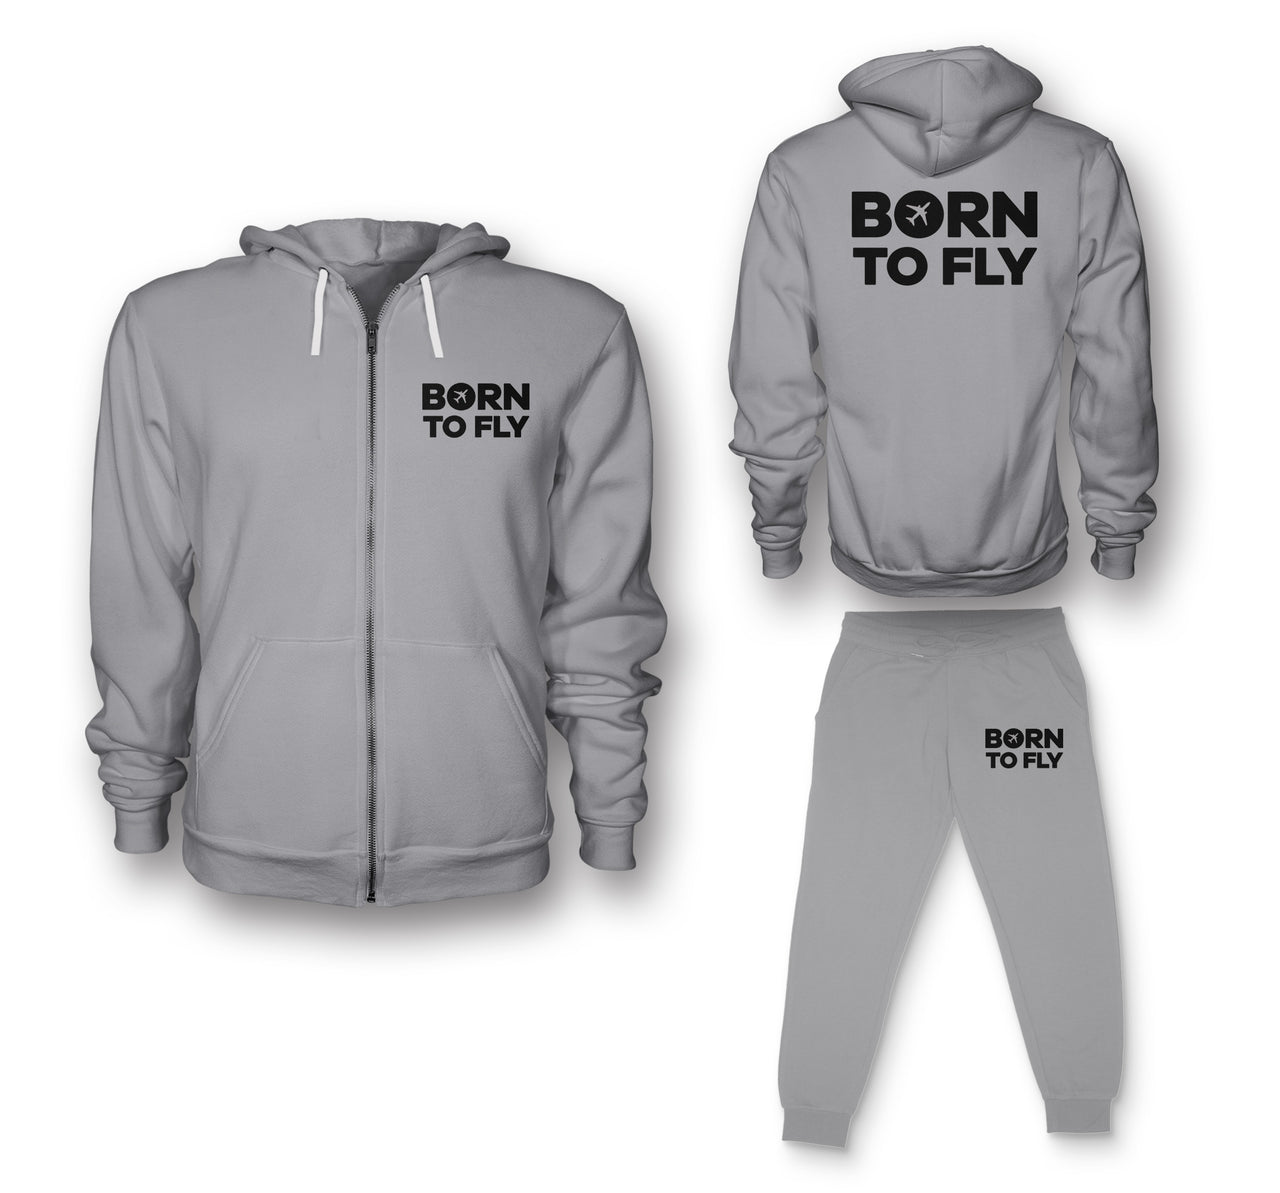 Born To Fly Special Designed Zipped Hoodies & Sweatpants Set